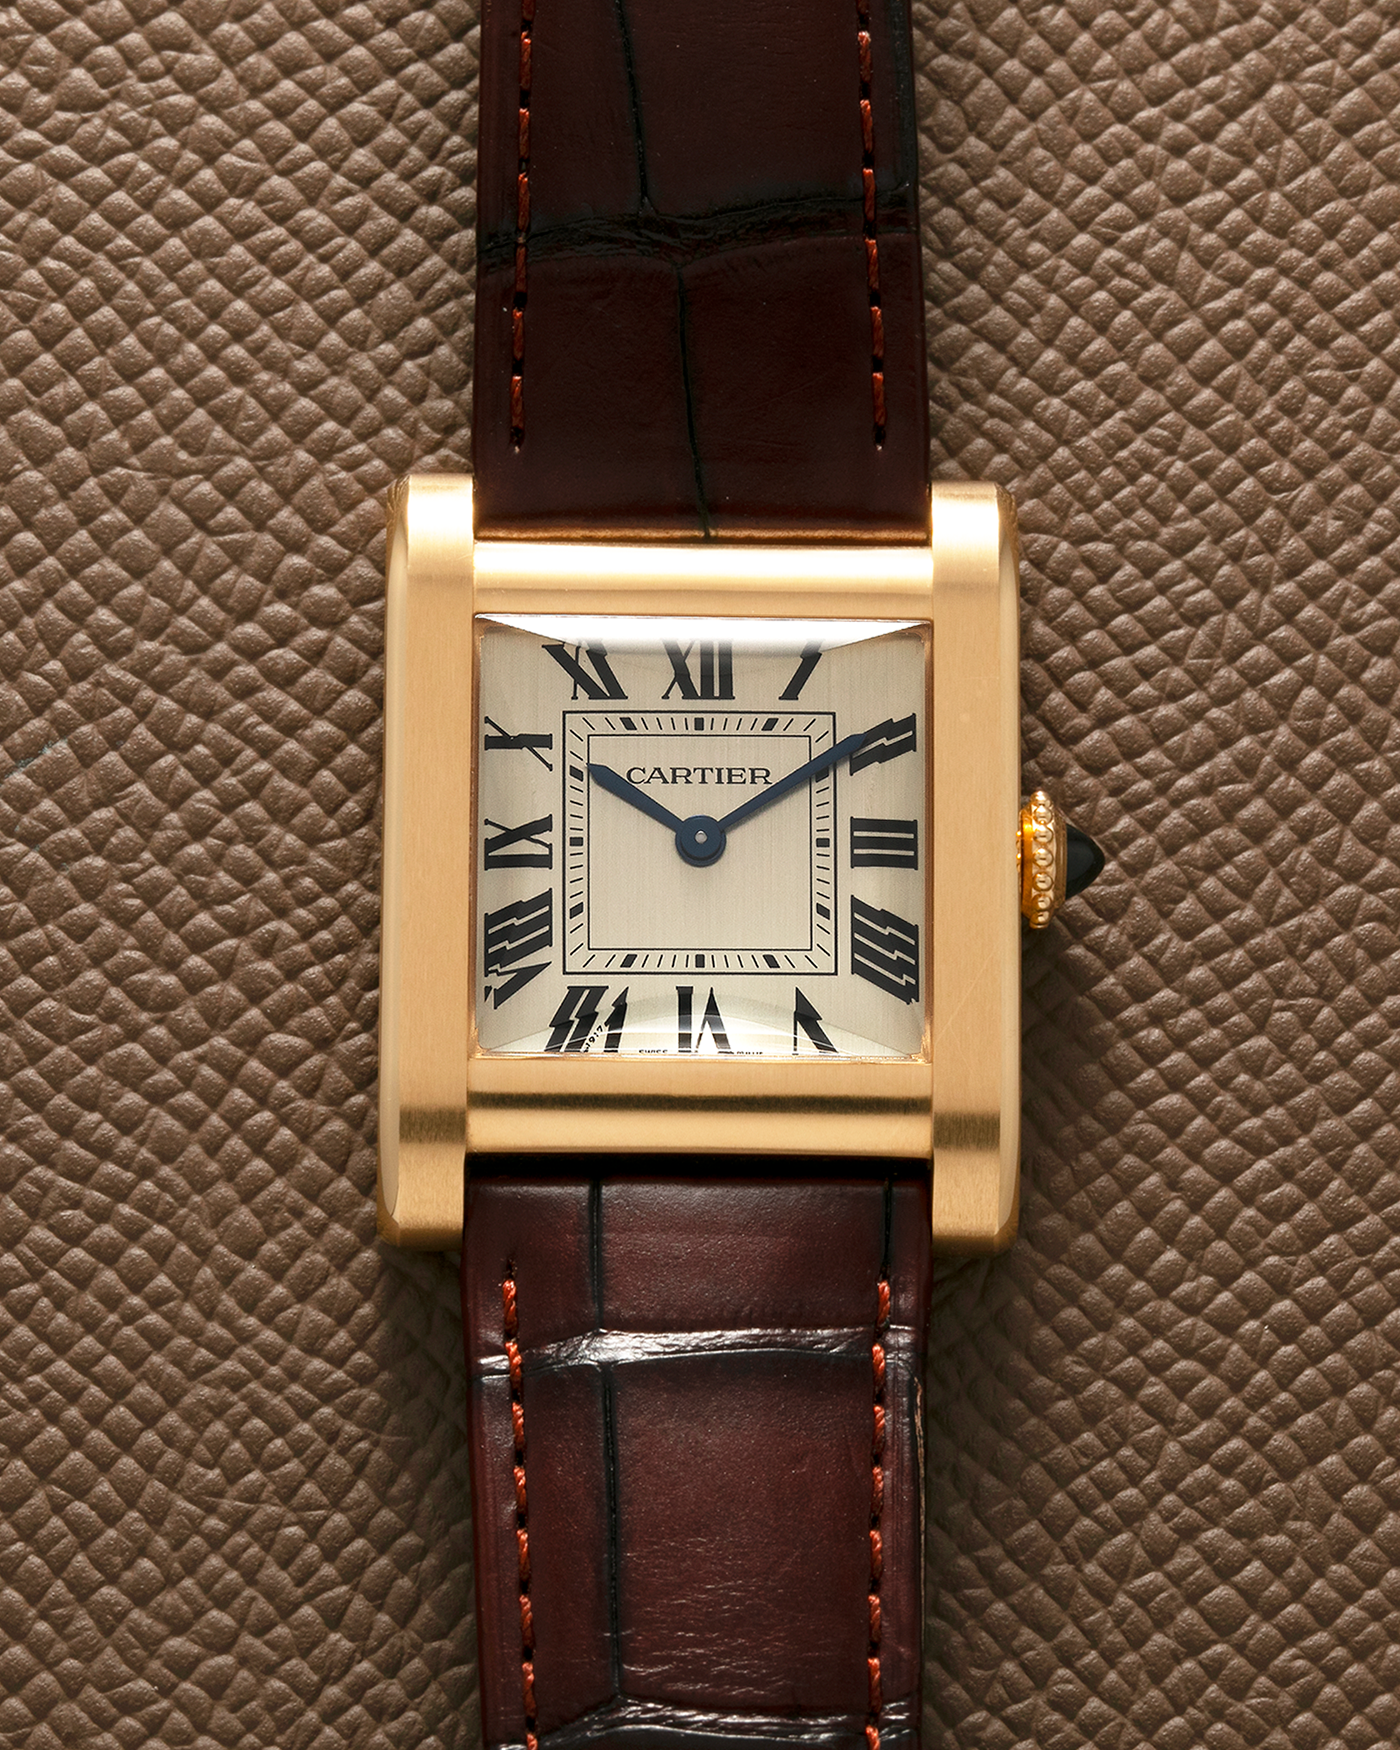 Brand: Cartier Year: 2023 Model: Privé Tank Normale, Limited to 200 Pieces in this Combination Reference Number: CRWGTA0108 Material: 18-carat Yellow Gold Movement: Cartier Cal. 070 MC, Manual-Winding Case Dimensions: 32.6mm x 25.7mm Lug Width: 19mm Strap: Cartier Brown Alligator Leather Strap with Signed 18-carat Yellow Gold Tang Buckle